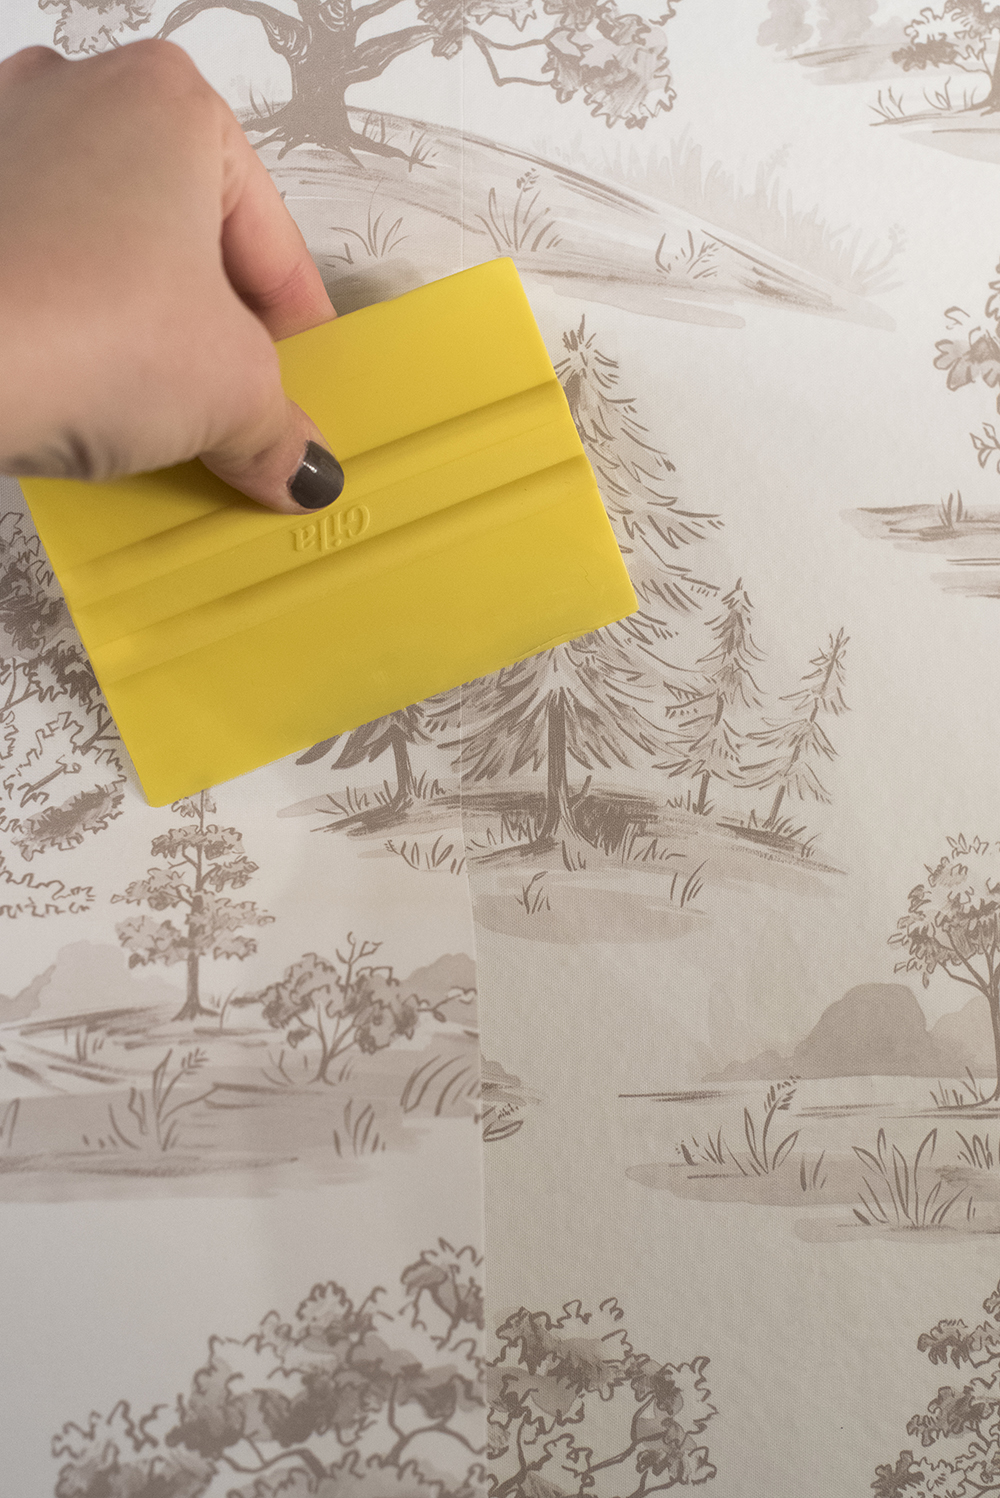 How to Install Peel-and-Stick Wallpaper - roomfortuesday.com